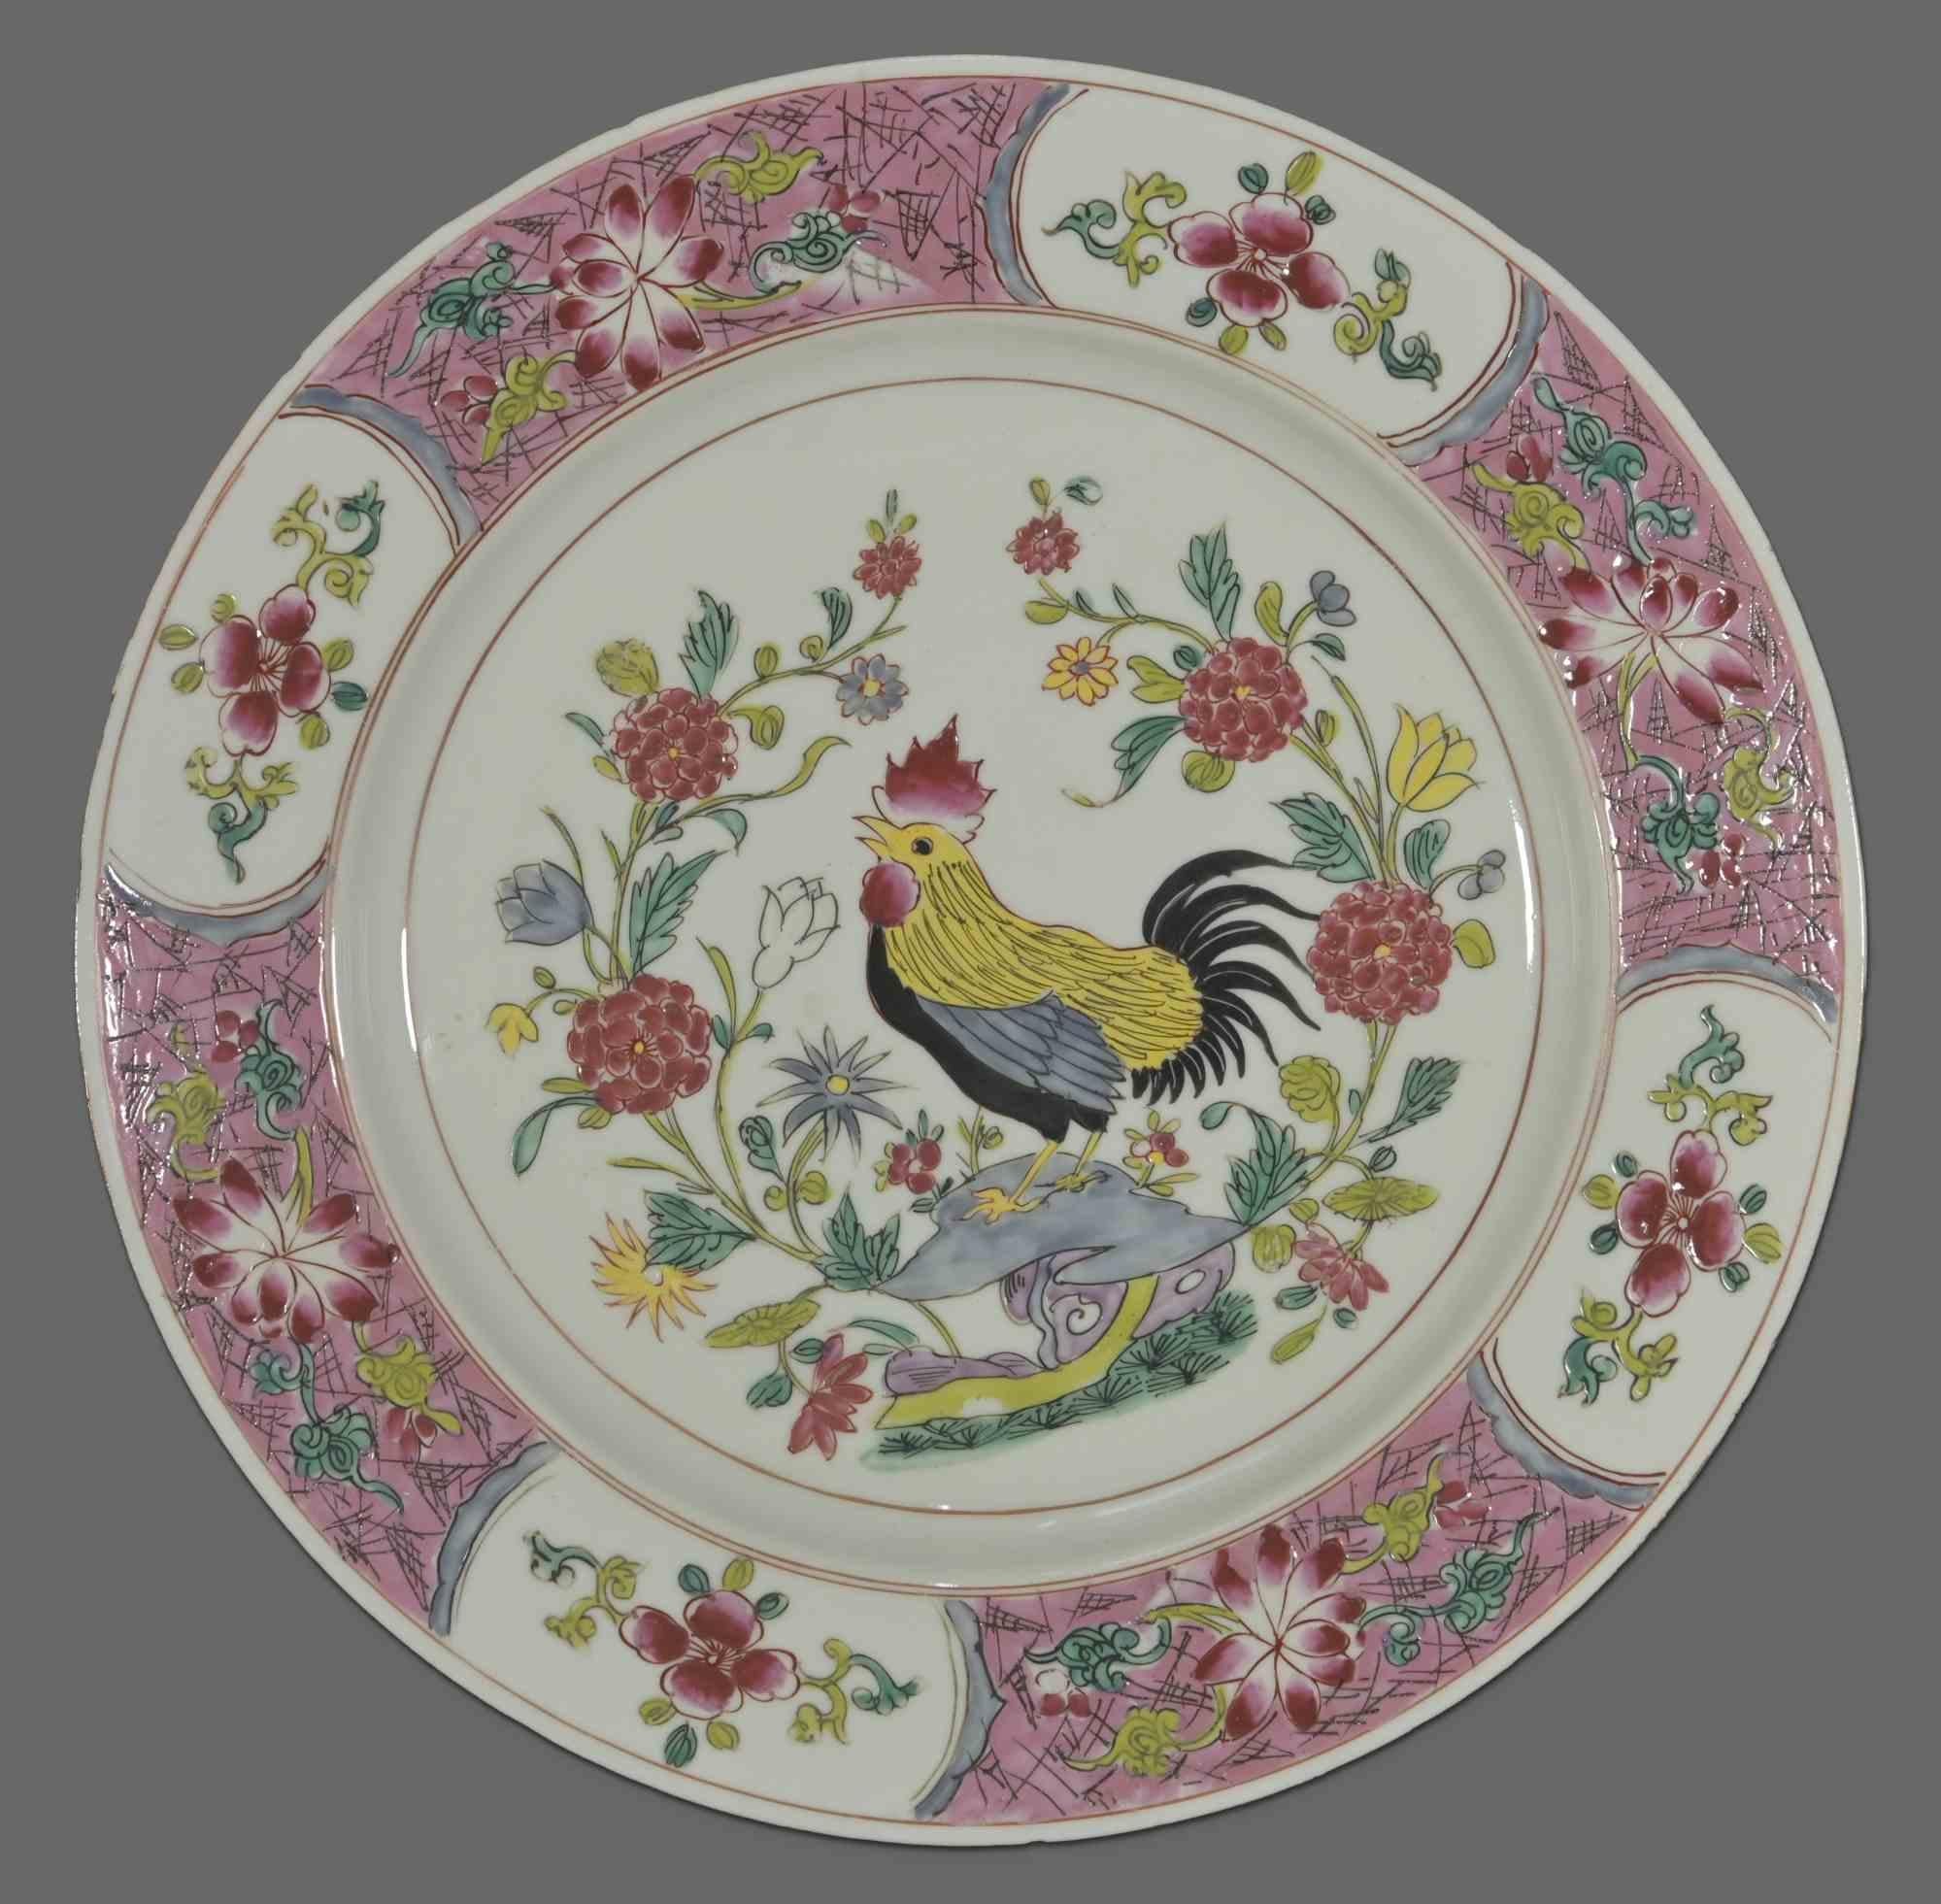 Chinese Ceramic plates, China mid-20th century. 

Floreal motifs on the edge with rooster in the centre of the plate 

Plate diameter 24 cm.

Good conditions.

.